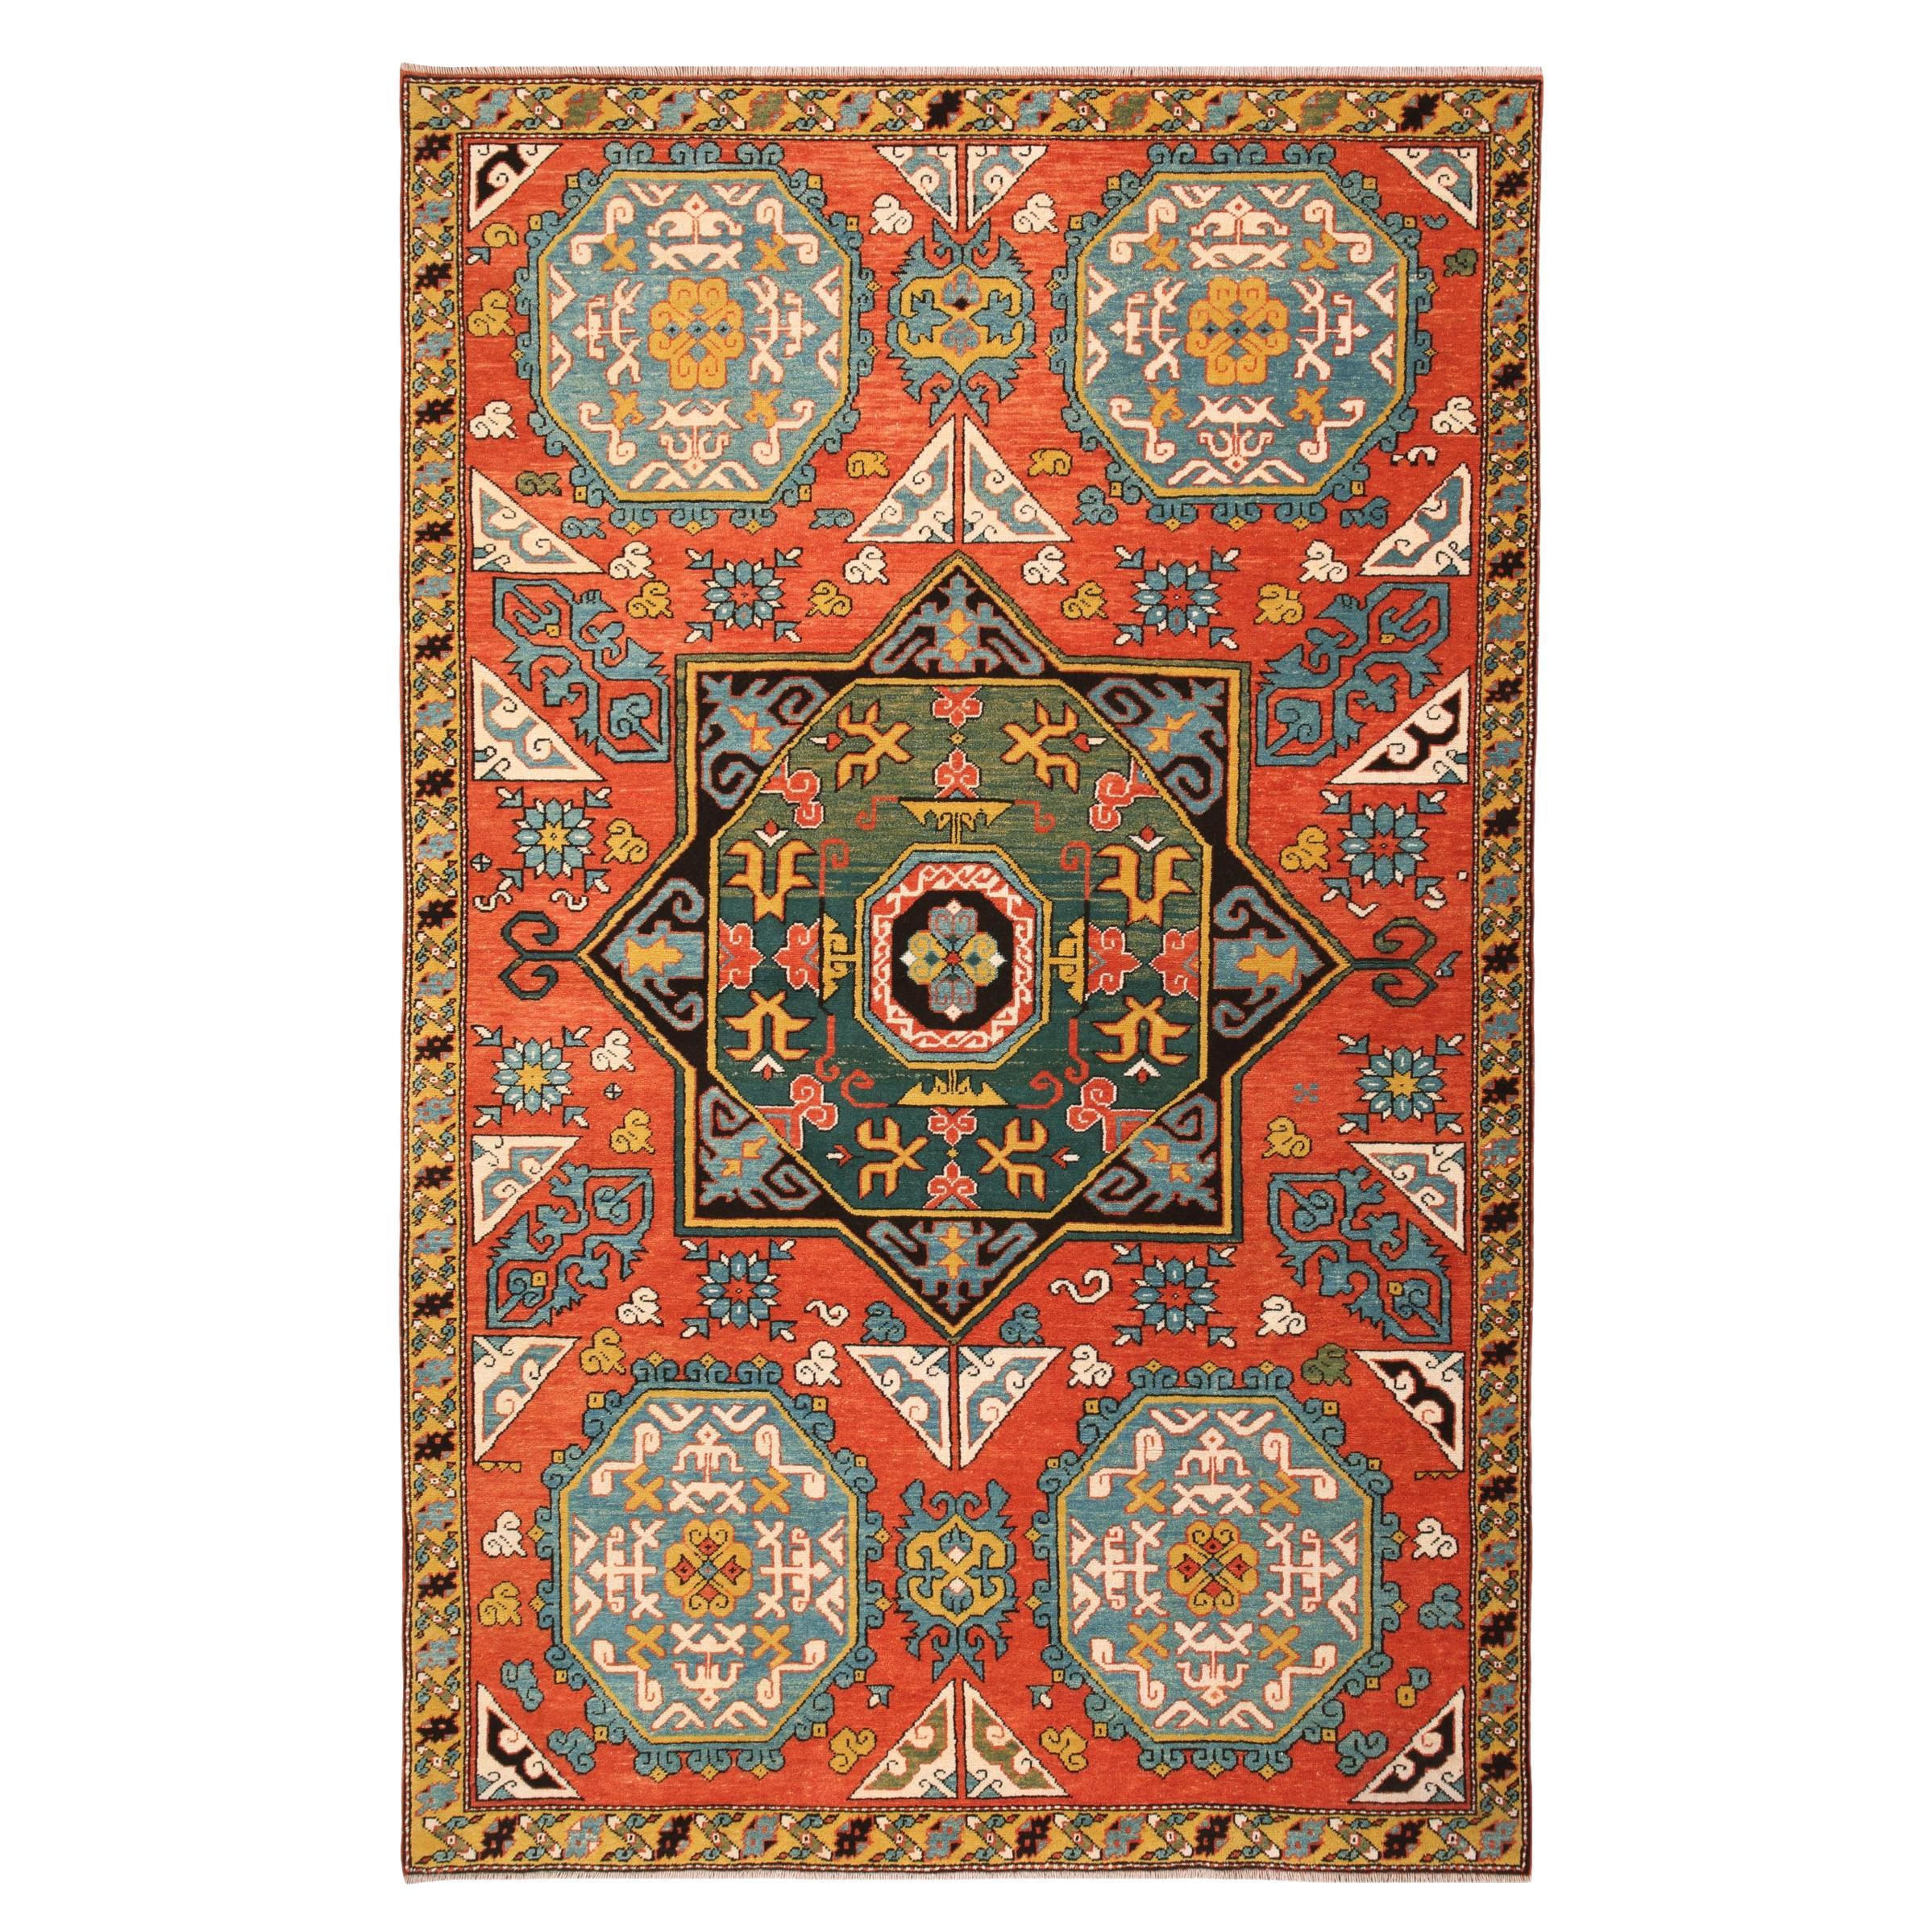 Ararat Rugs Star and Octagon Medallion Carpet Anatolian Revival Rug Natural Dyed For Sale